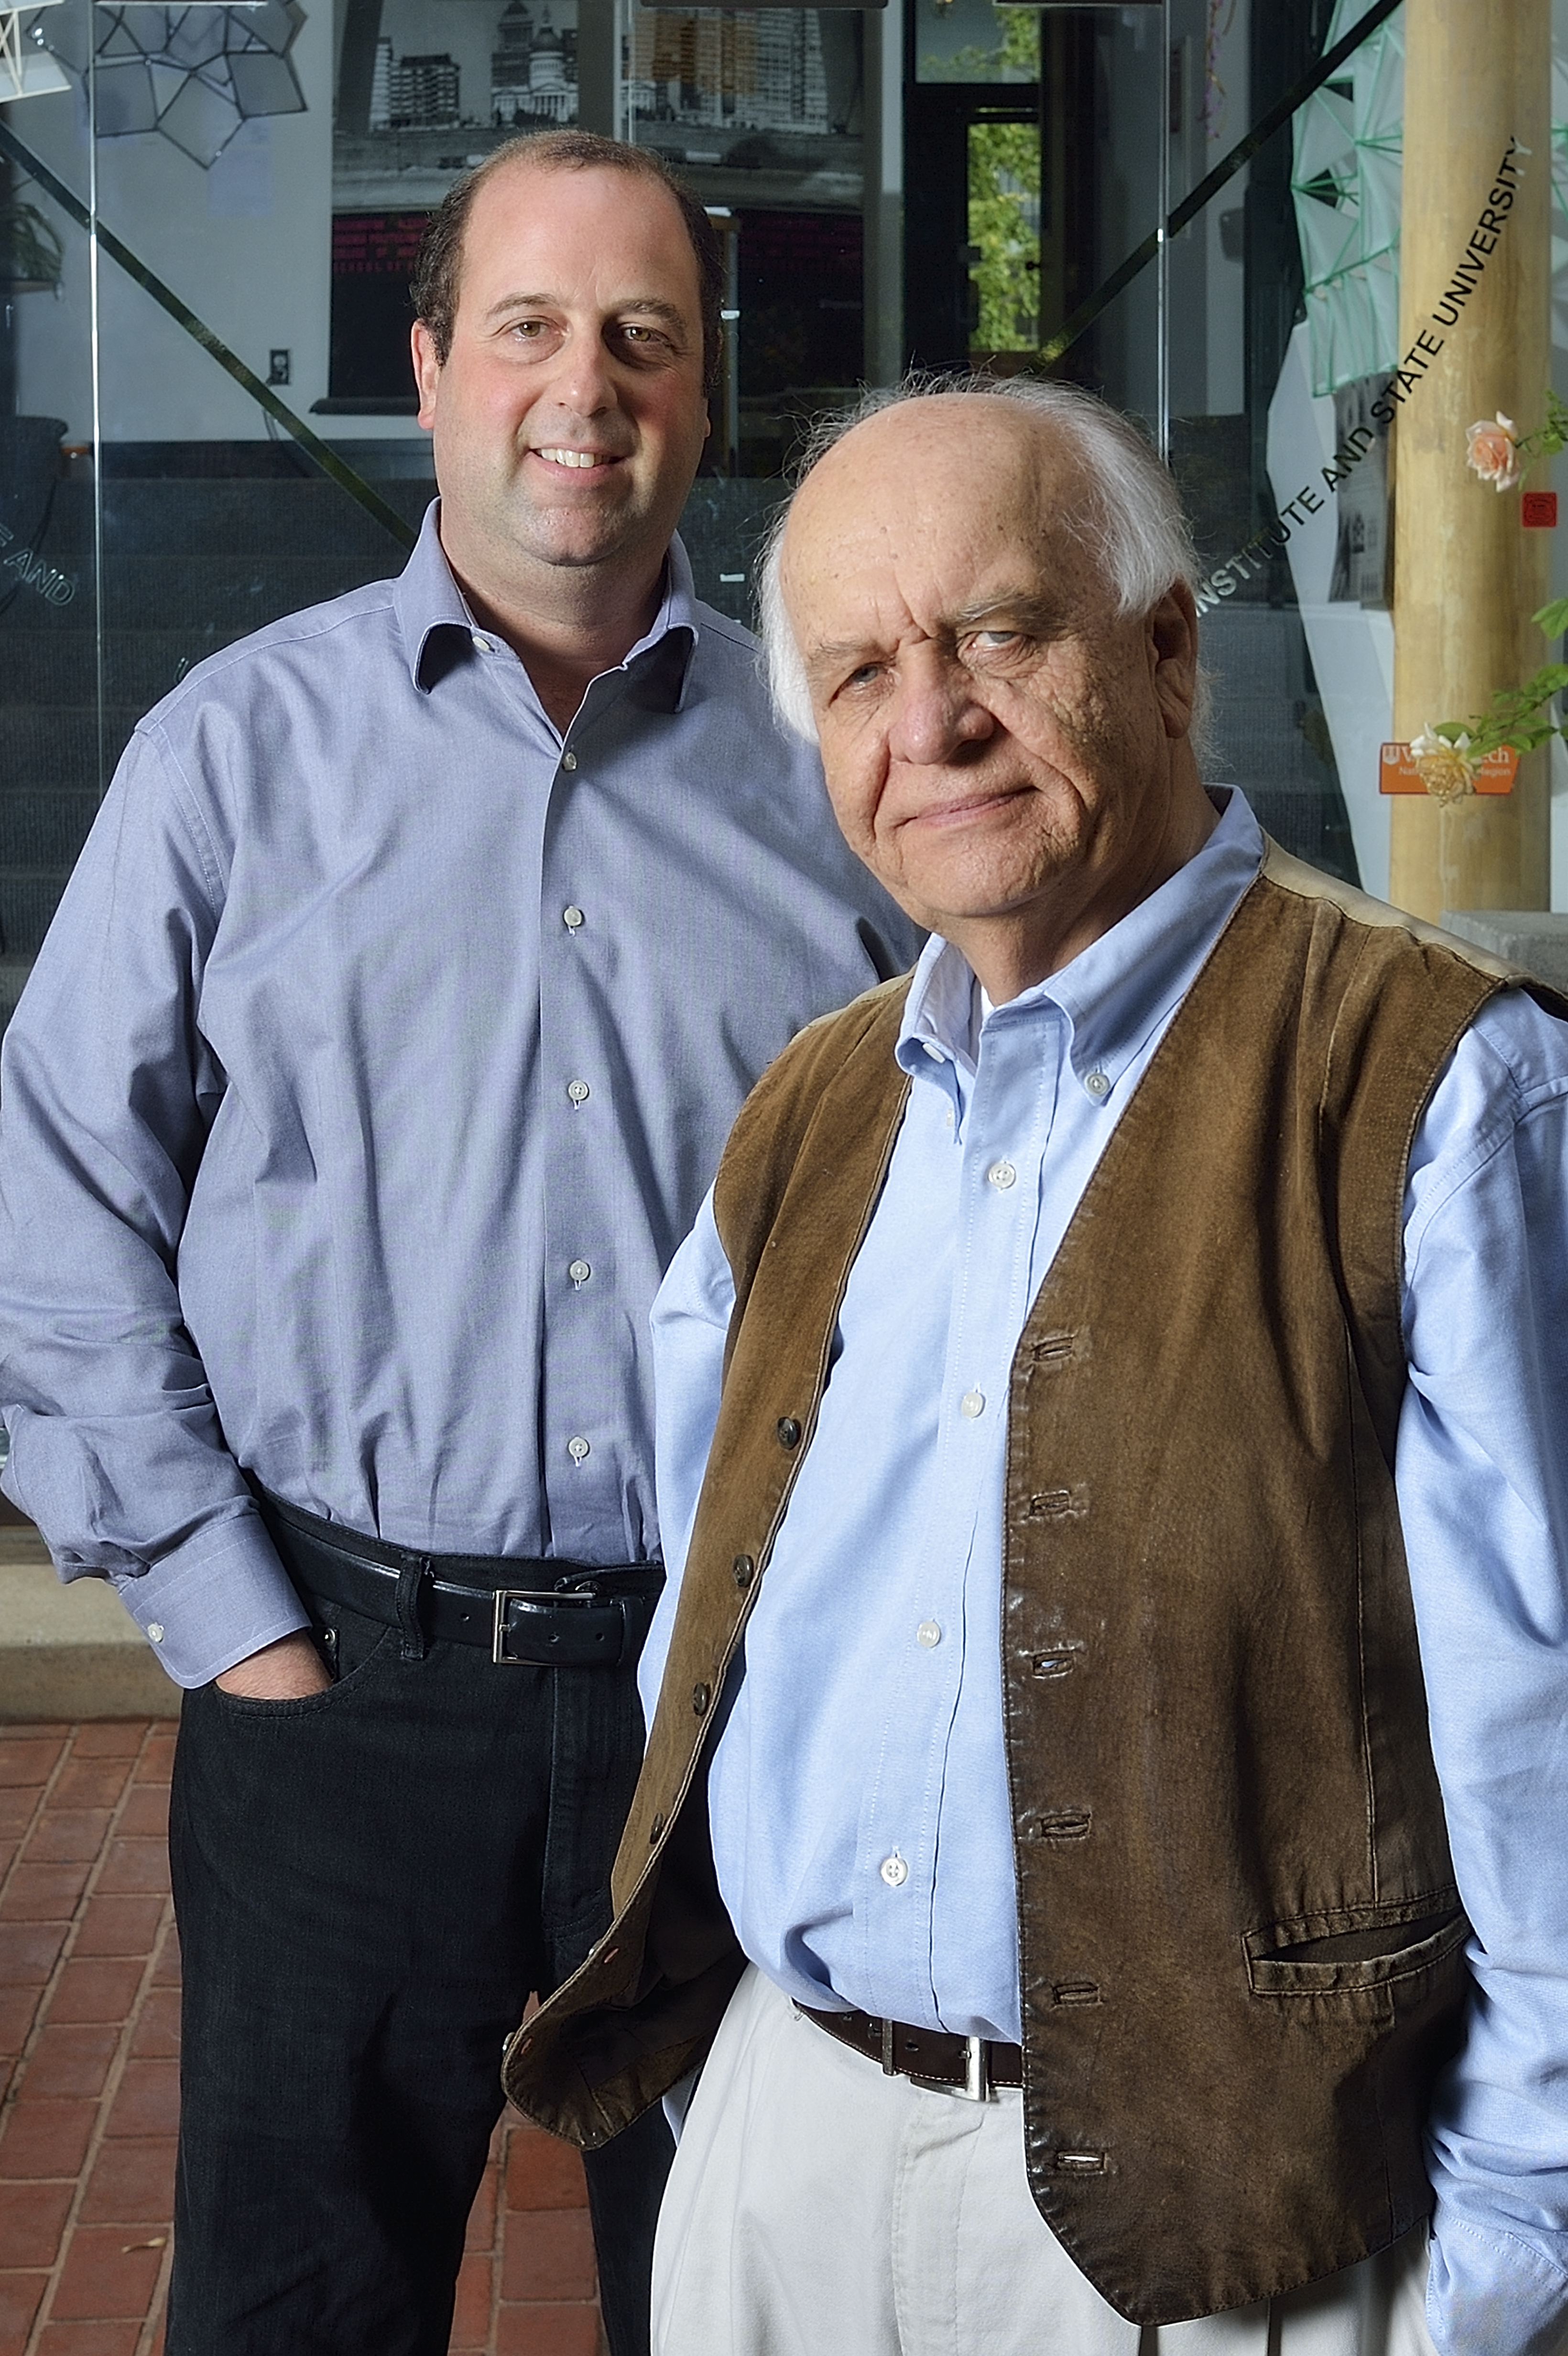 Henry Hollander and Jaan hold standing in front of the glass doors and brick building of the washington-alexandria architecture center